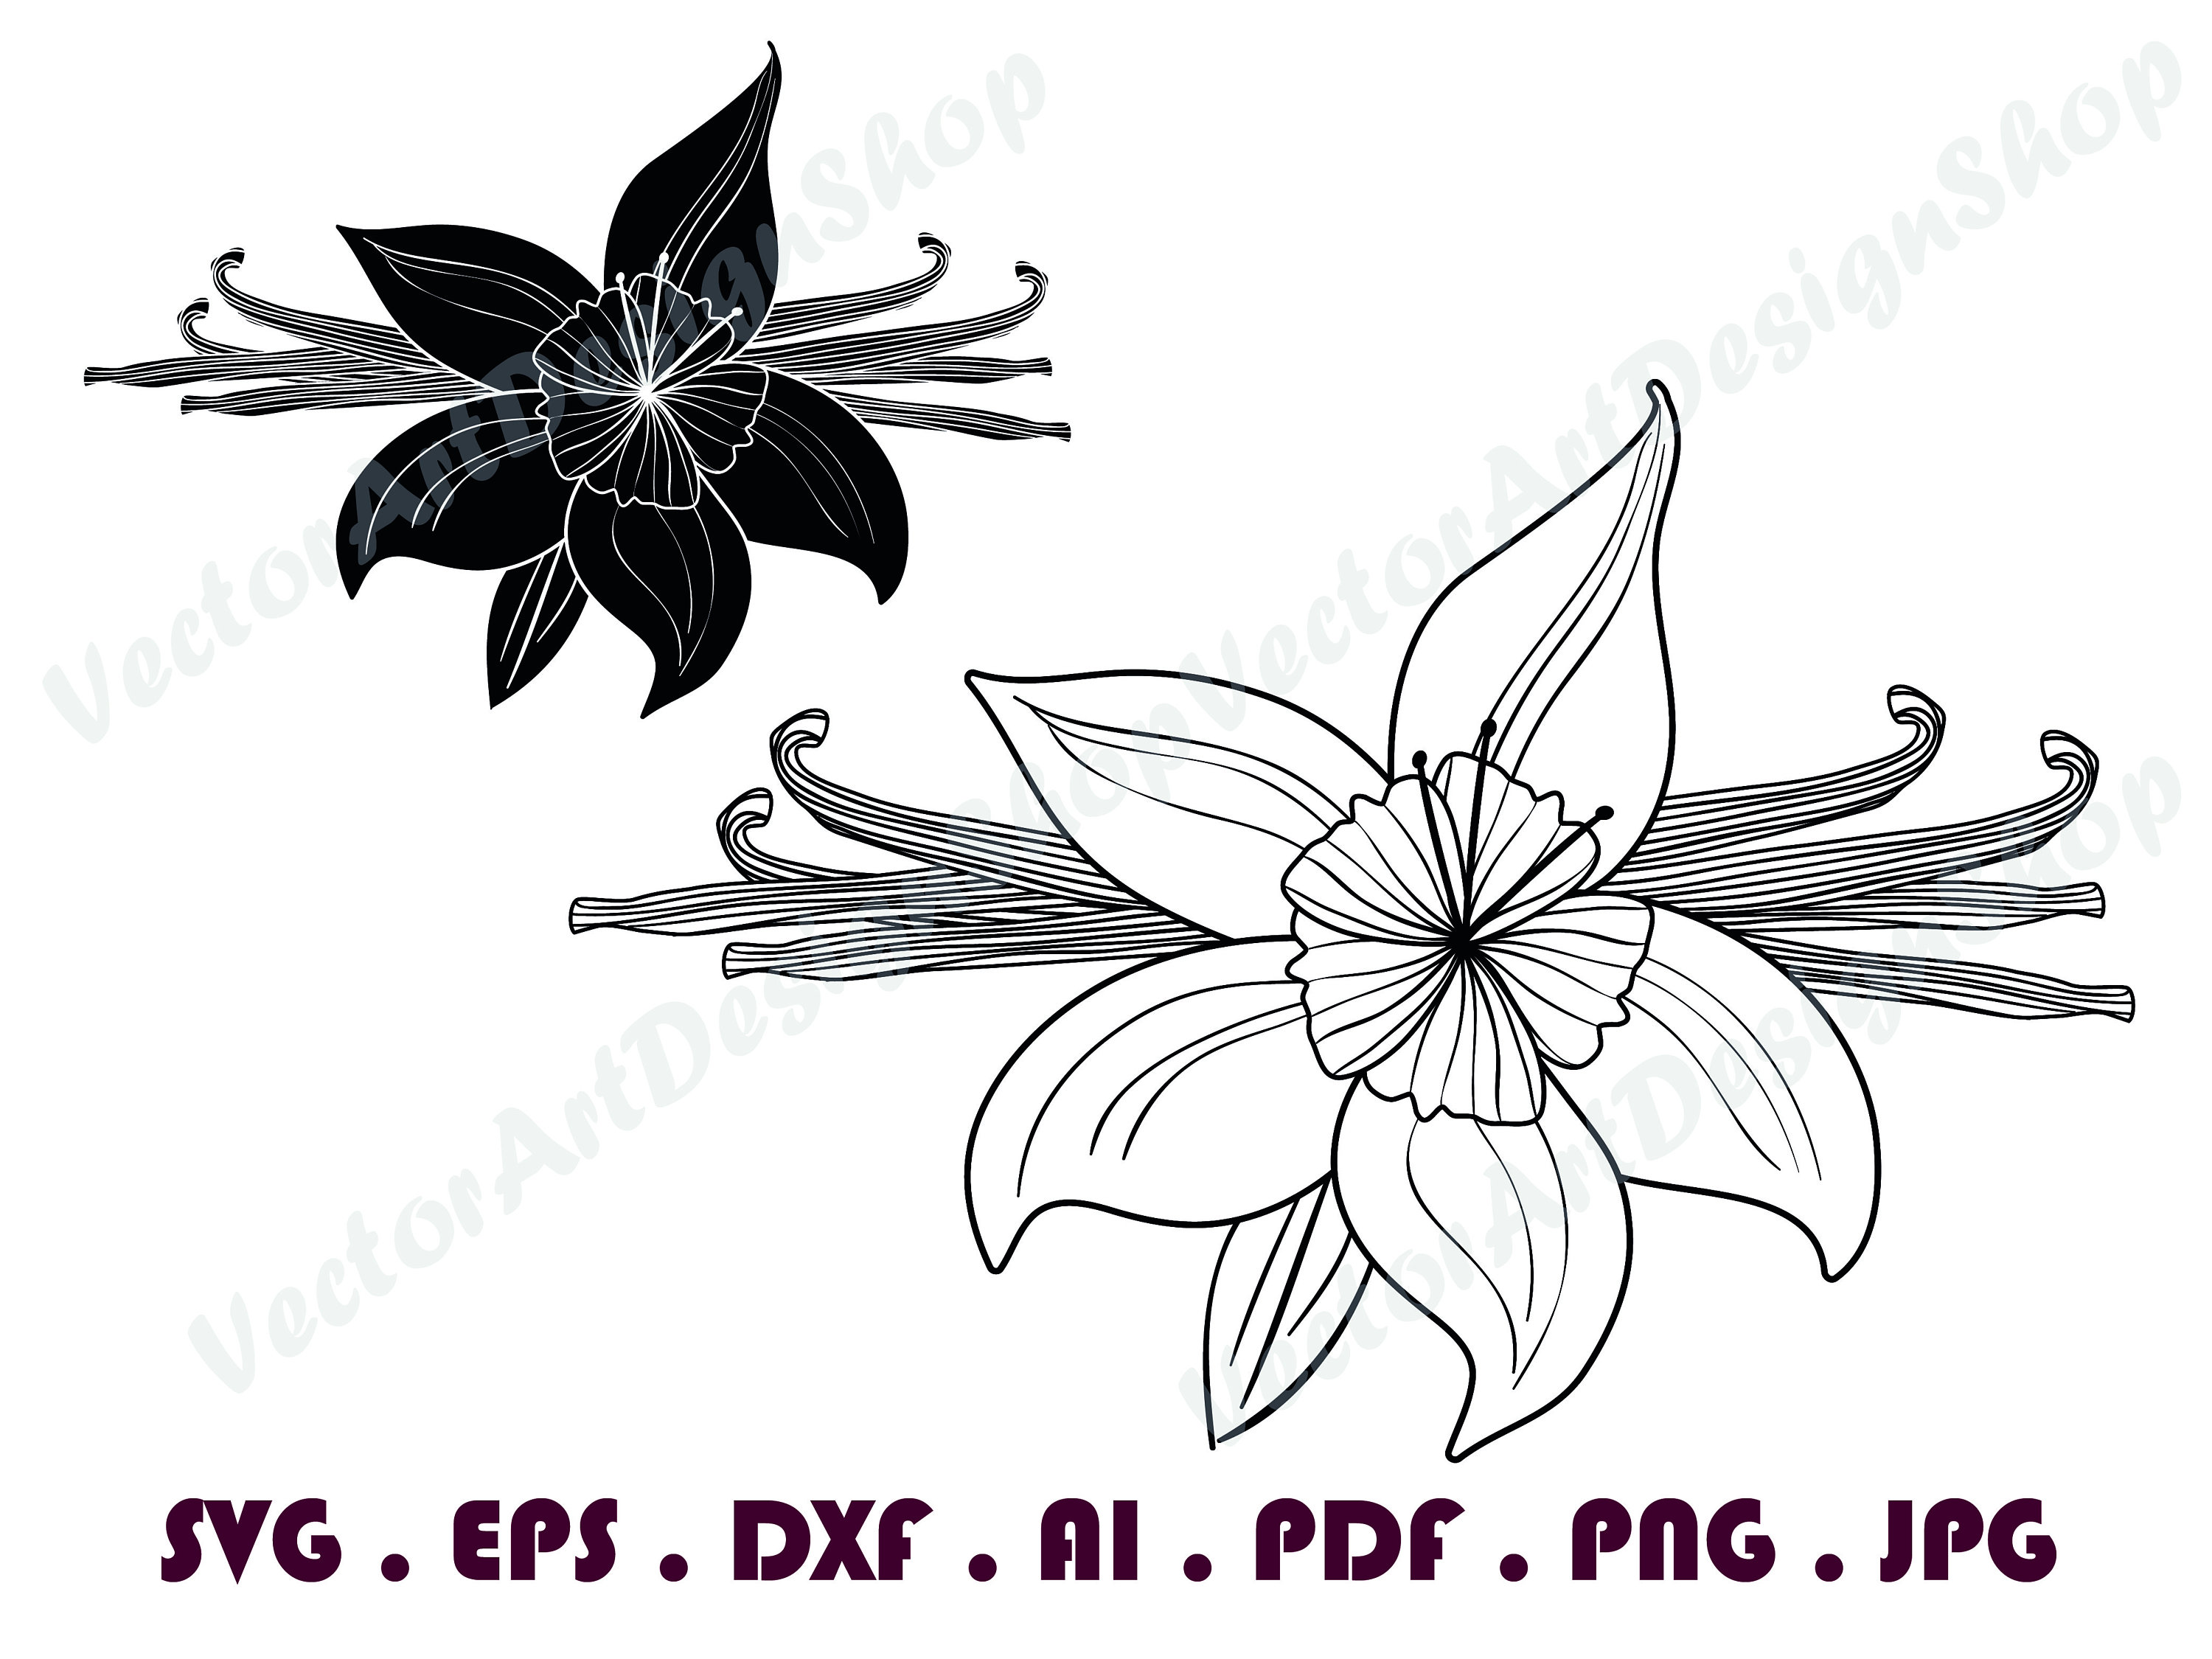 graphical png ai eps svg jpg,Download files set Vector VANILLA SPICE SVG,Art Print dxf hand drawn